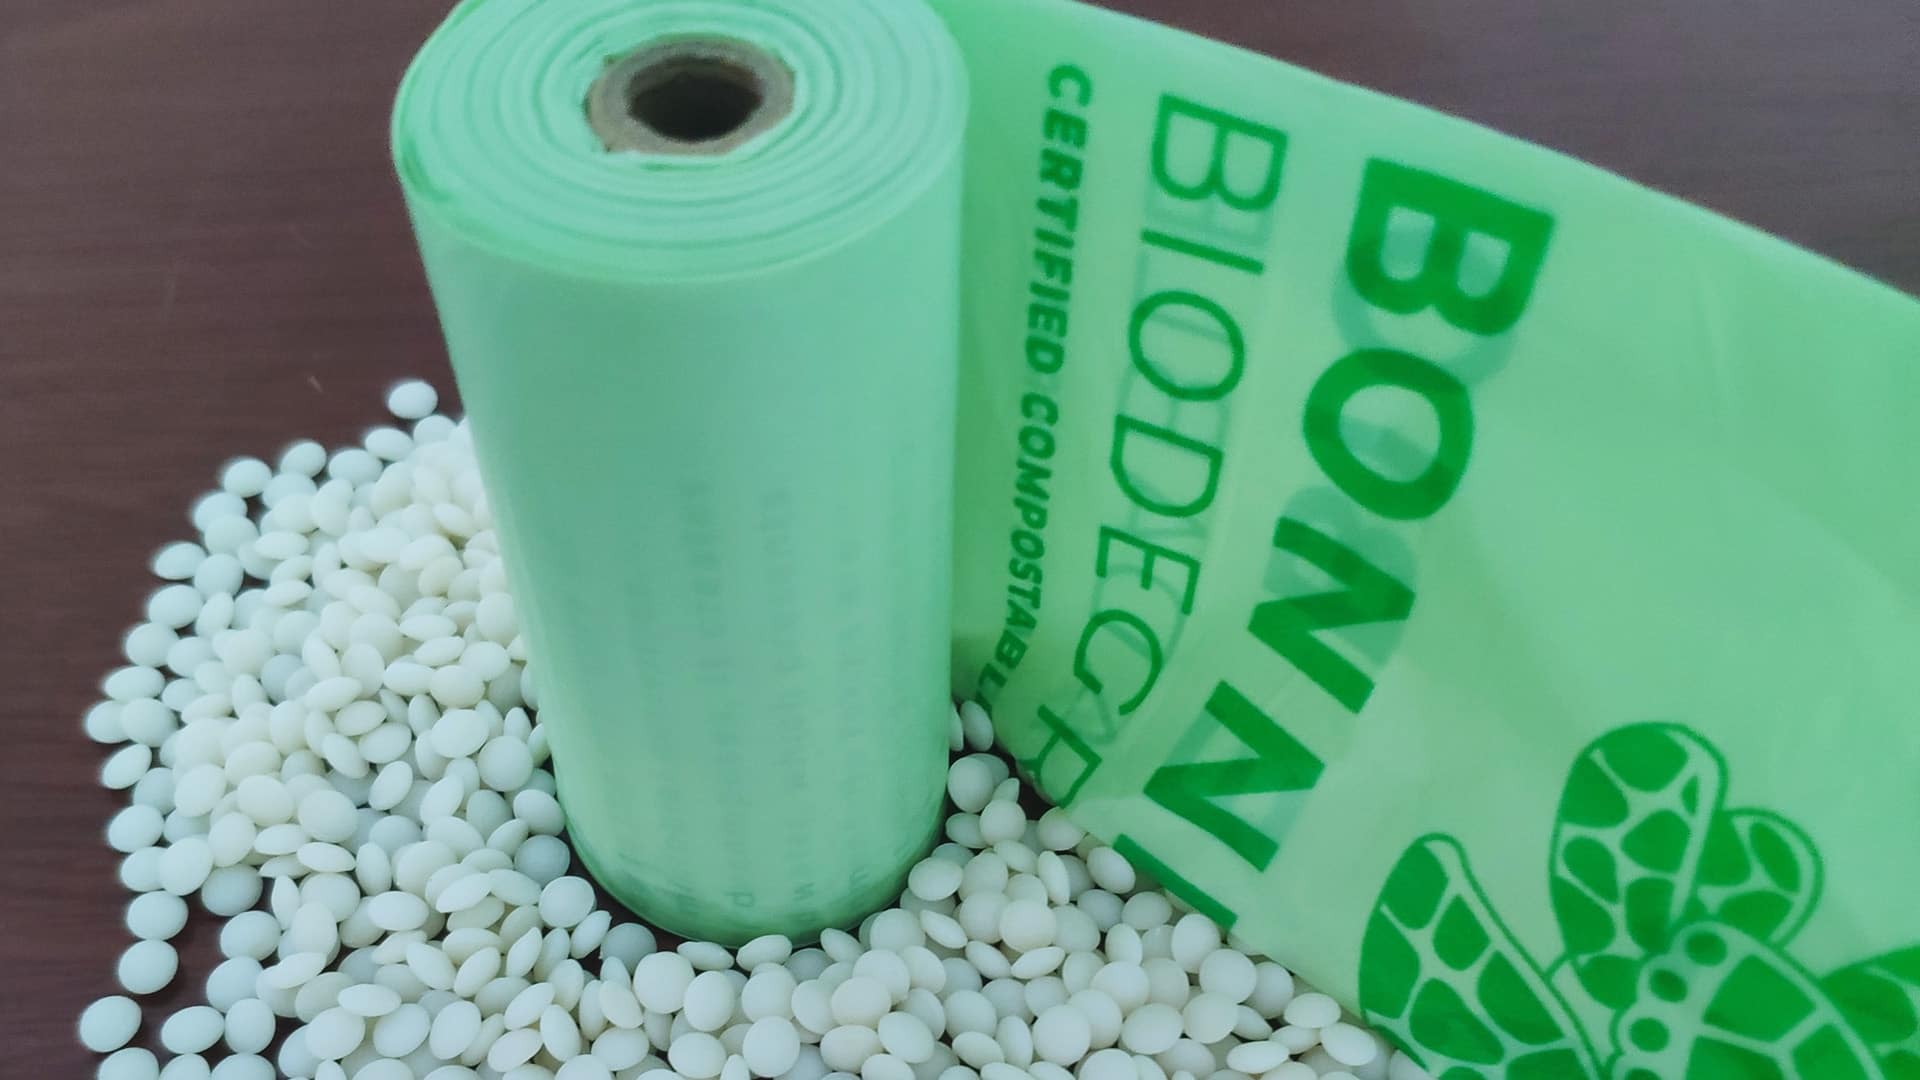 Plastic is not 100 pc biodegradable, greenwashing will tantamount to misleading ads: BIS